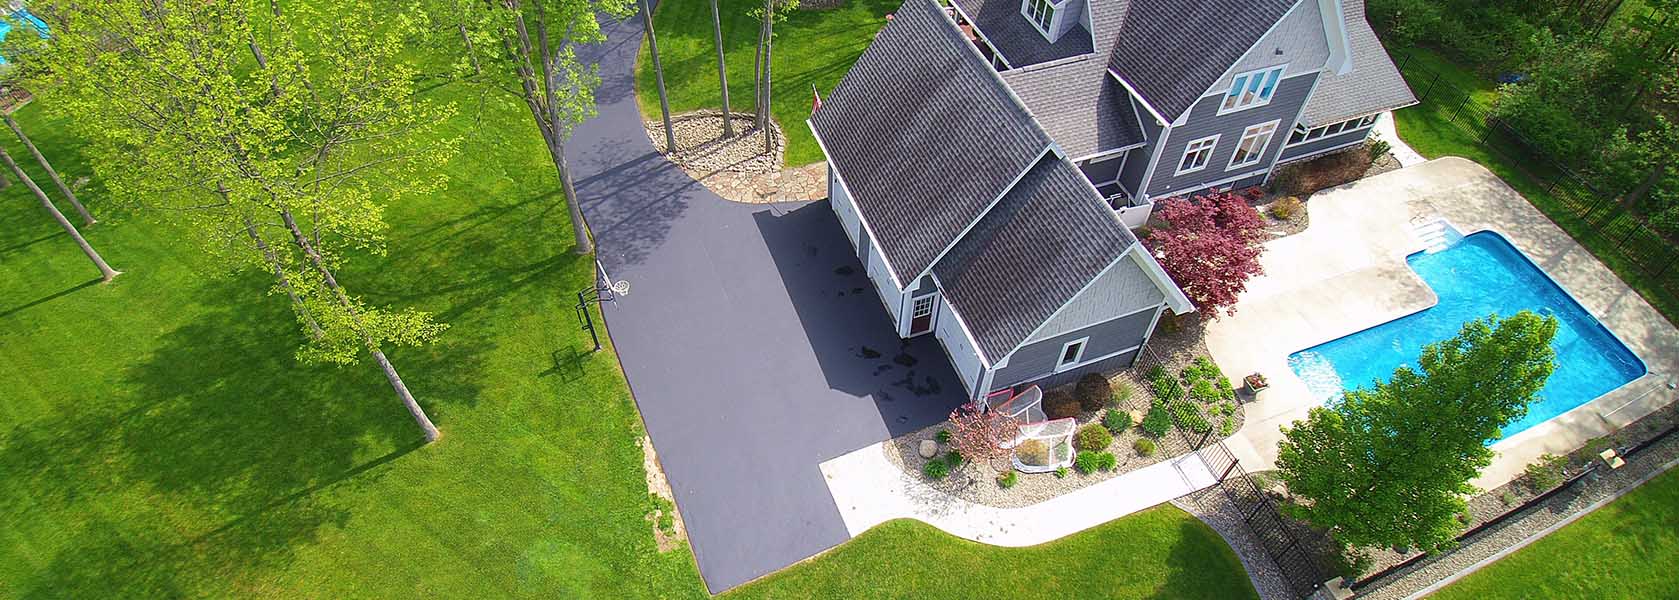 Residential Driveway Paving in Rochester, NY | North Coast Property Maintenance